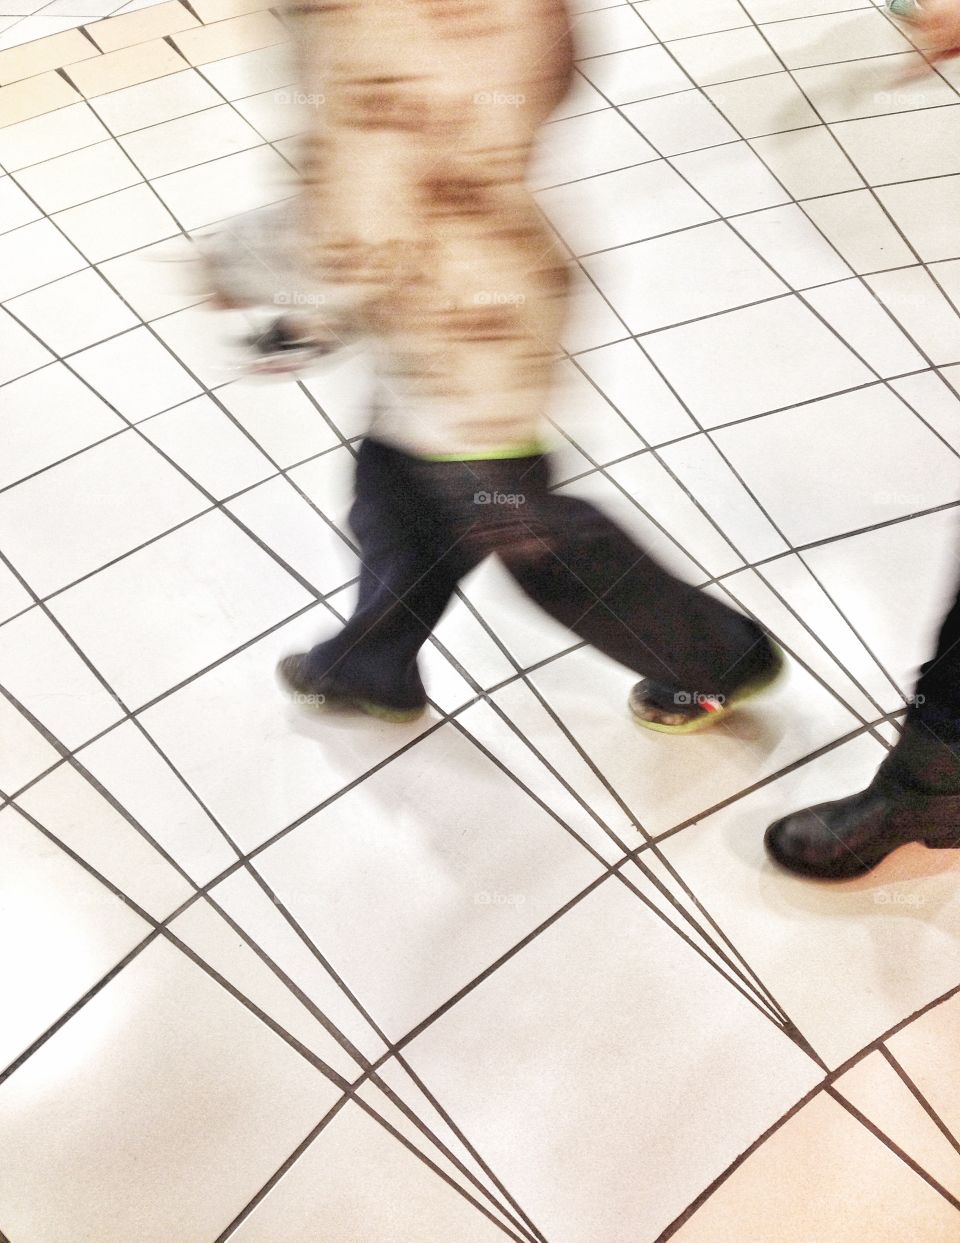 People Rushed, Motion Blur. 
Shoppers blurred as they are rushing, in a hurry at the mall